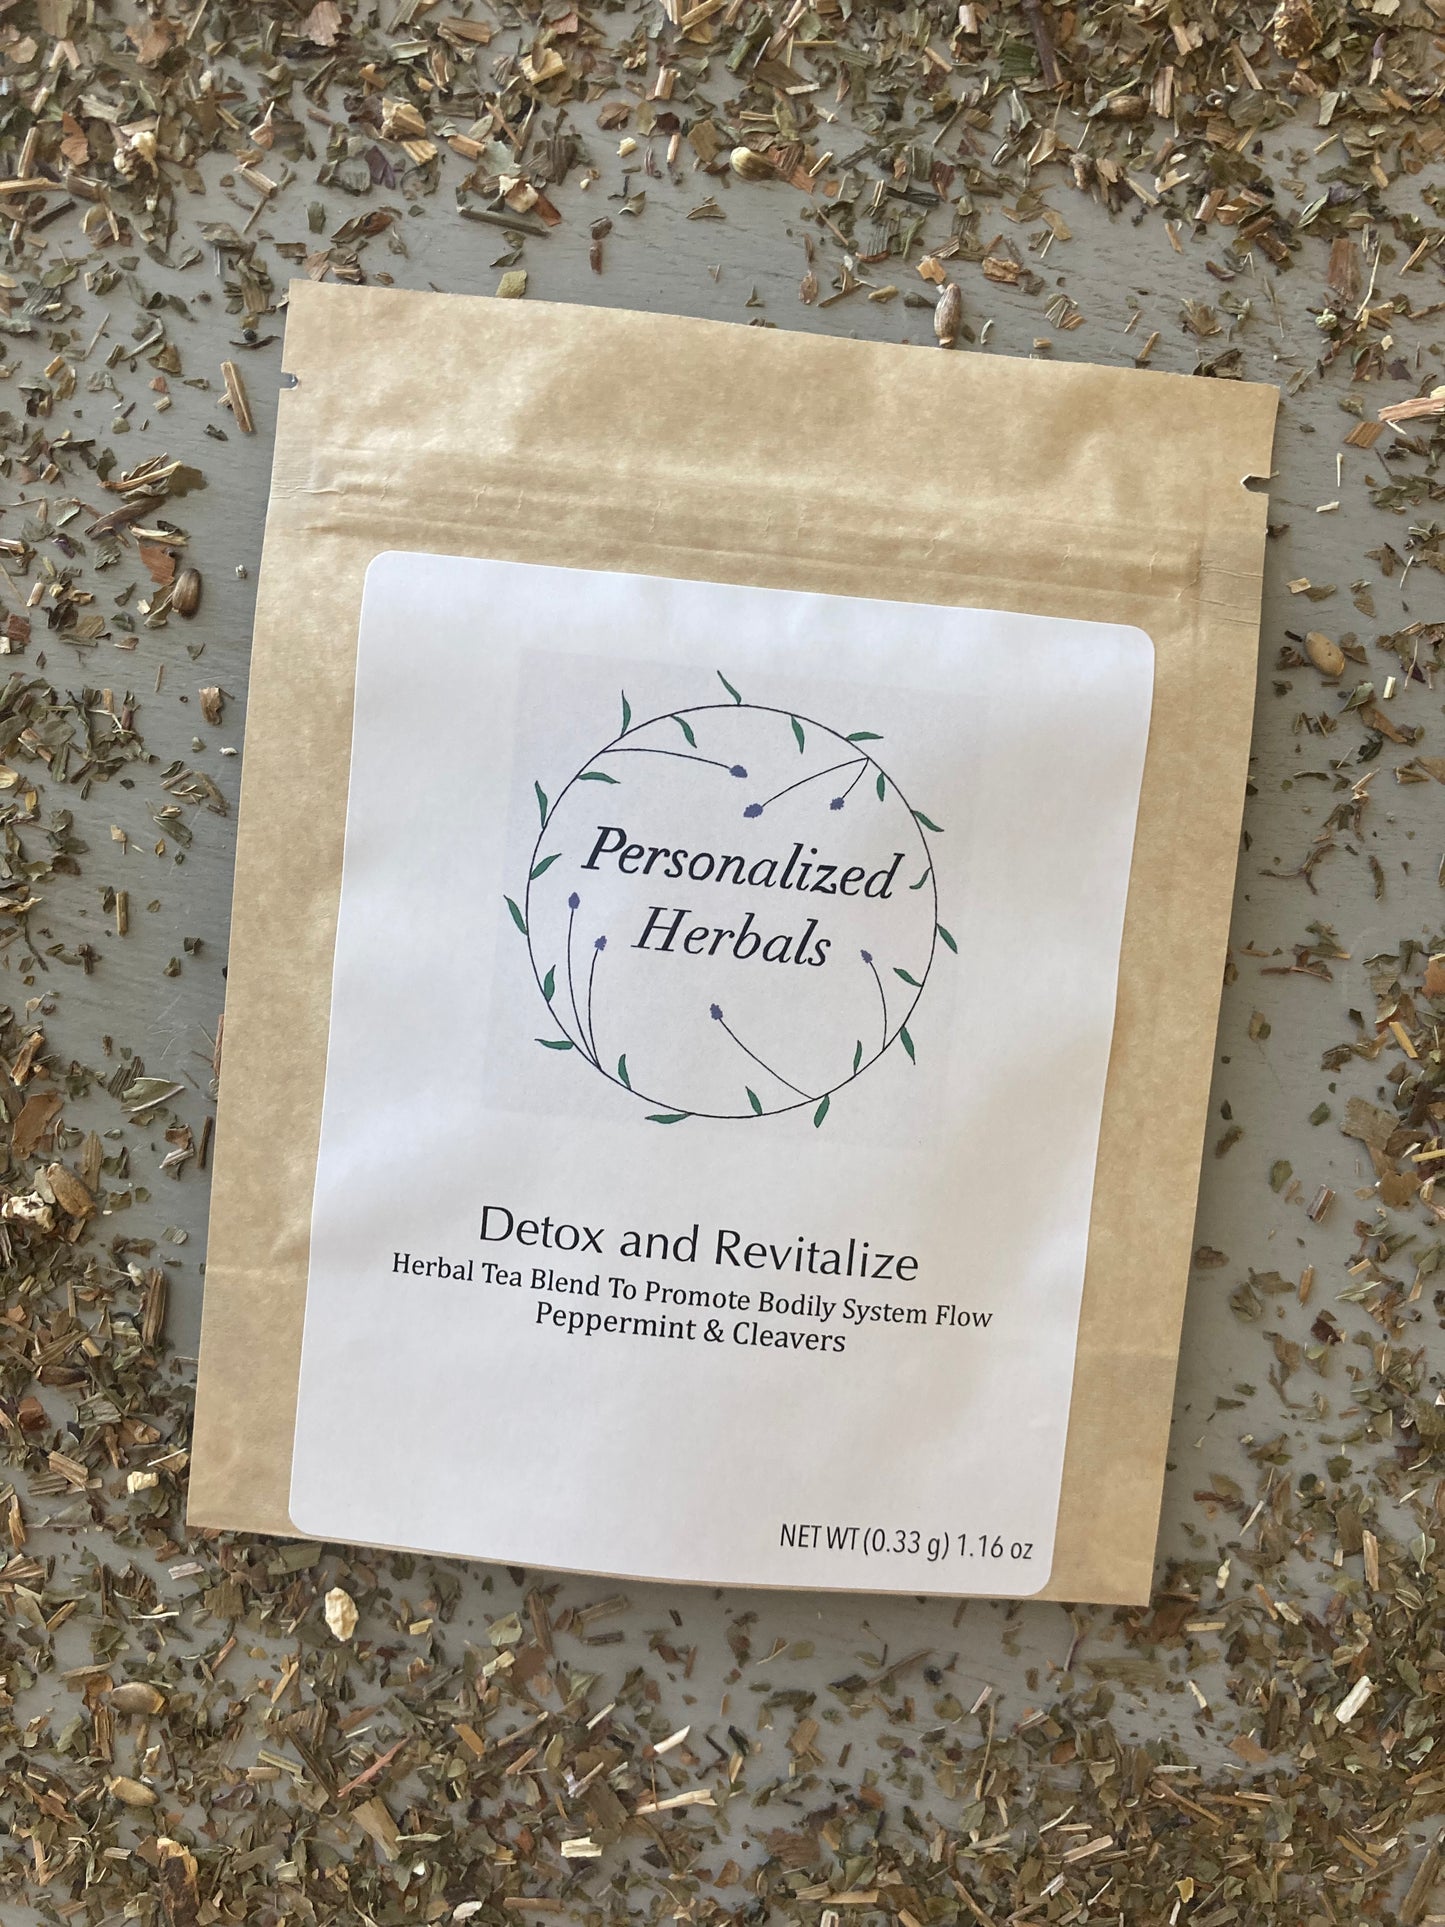 Herbal Tea Blend To Support Bodily System Flow